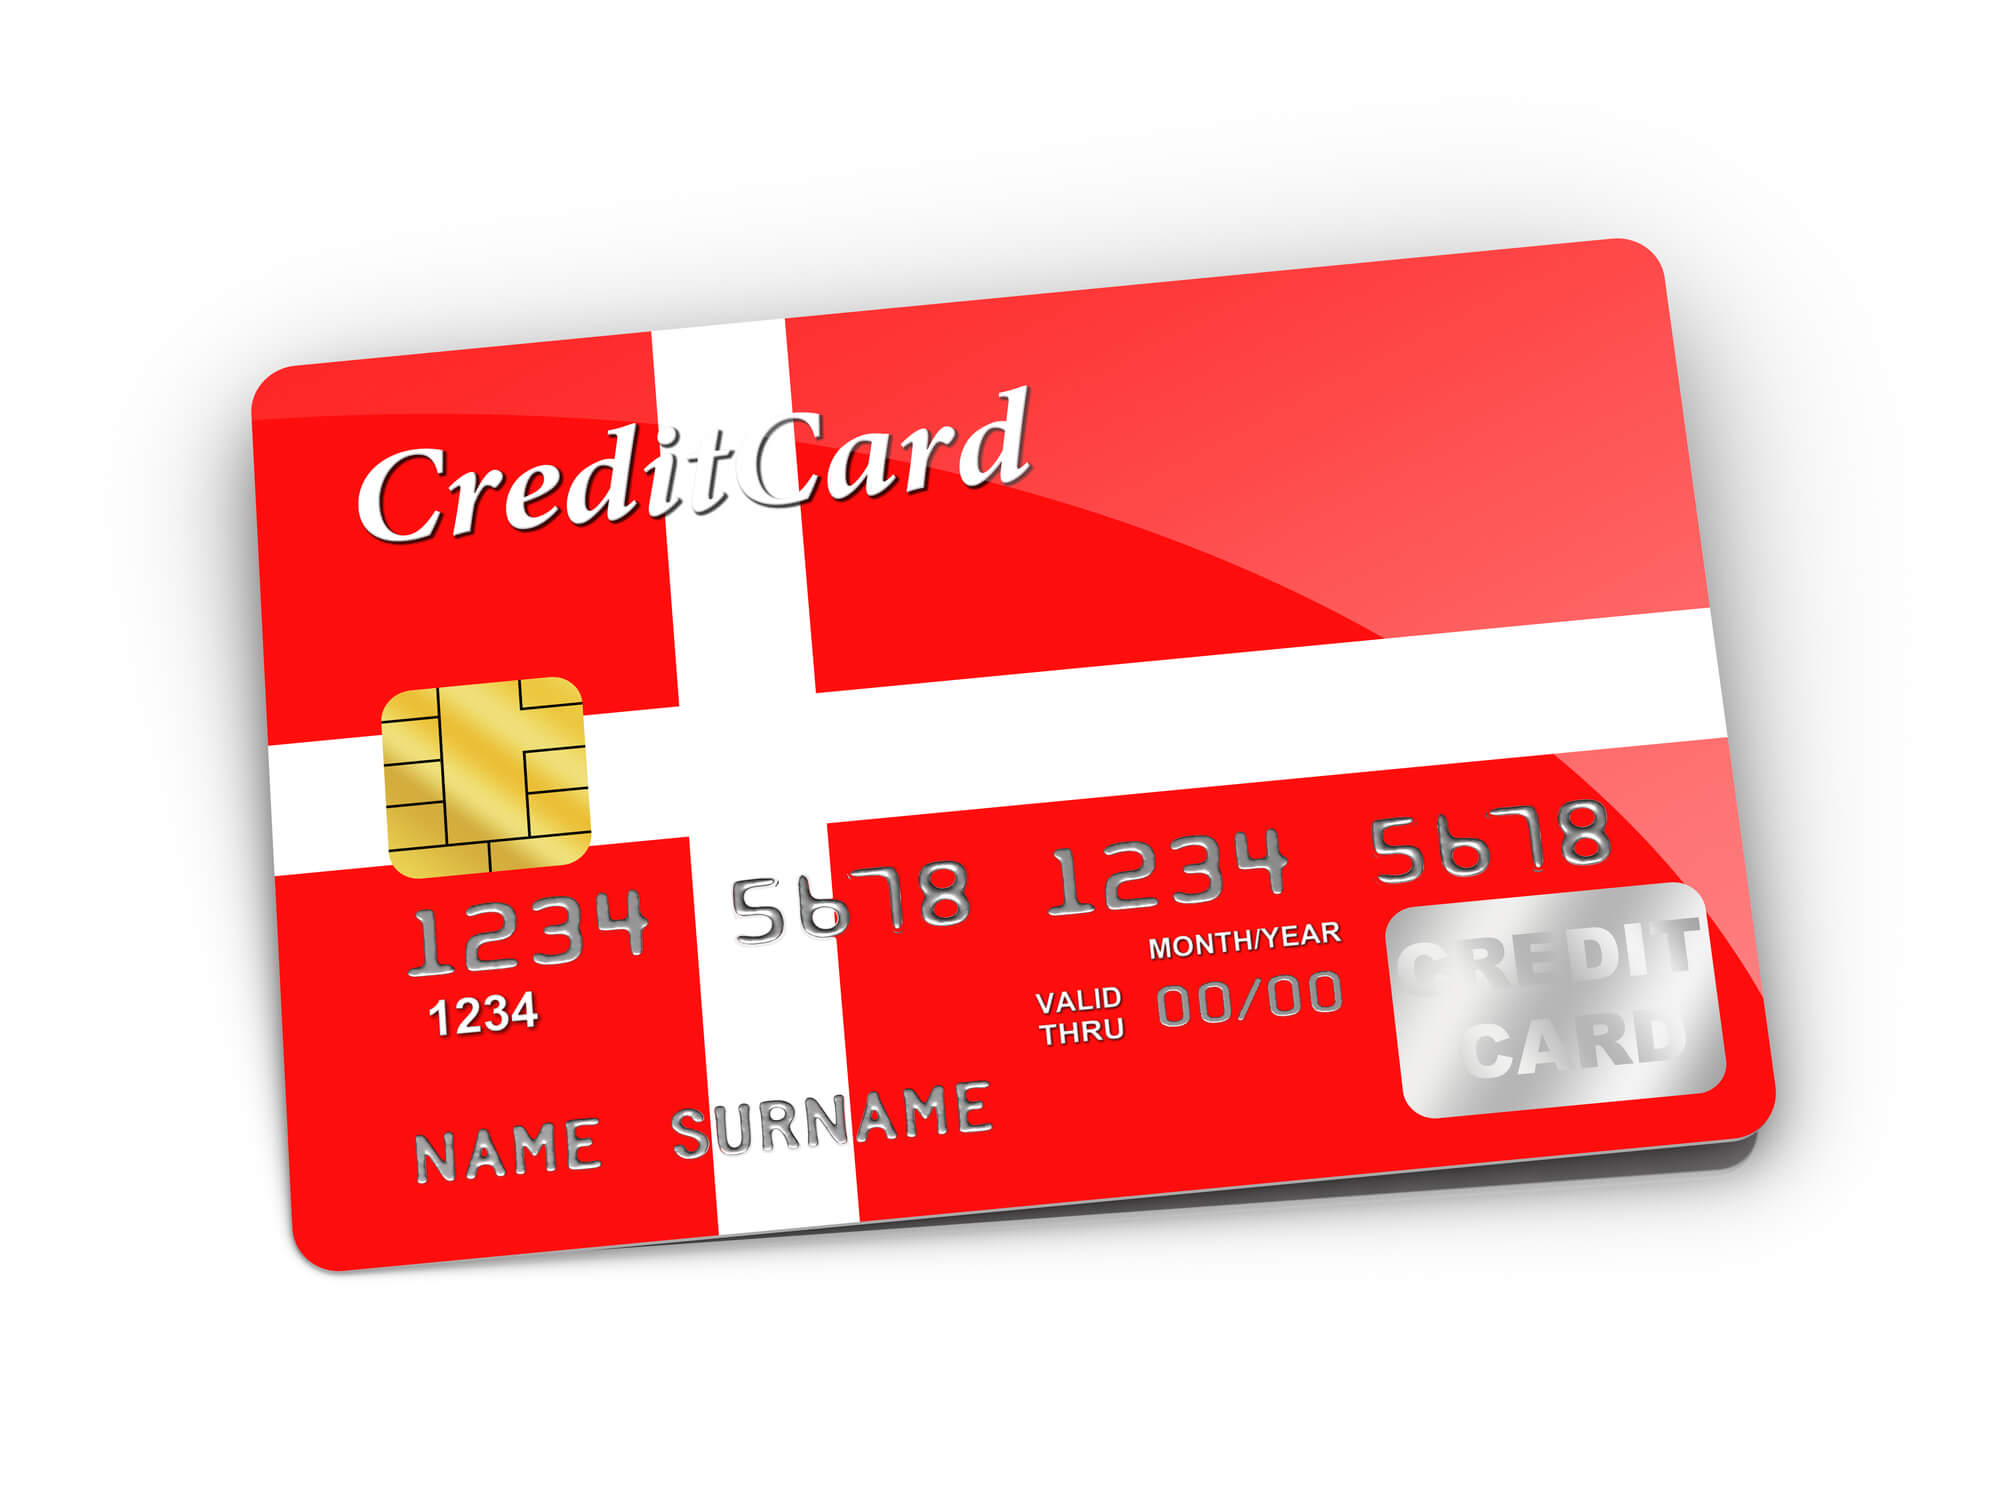 The Best Credit Card in Denmark for Expats